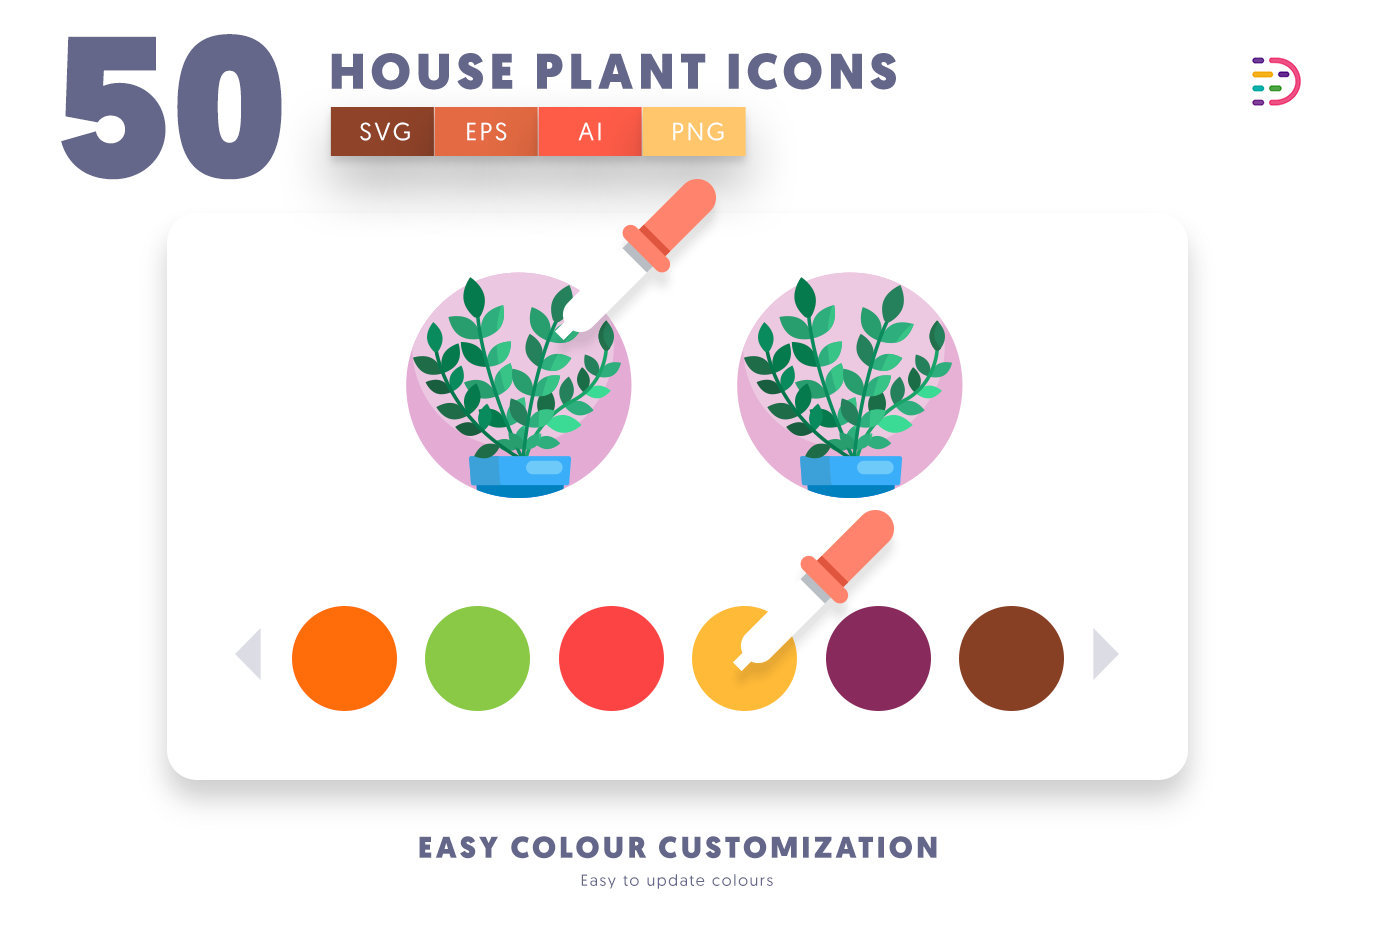  full vector House Plant Icons